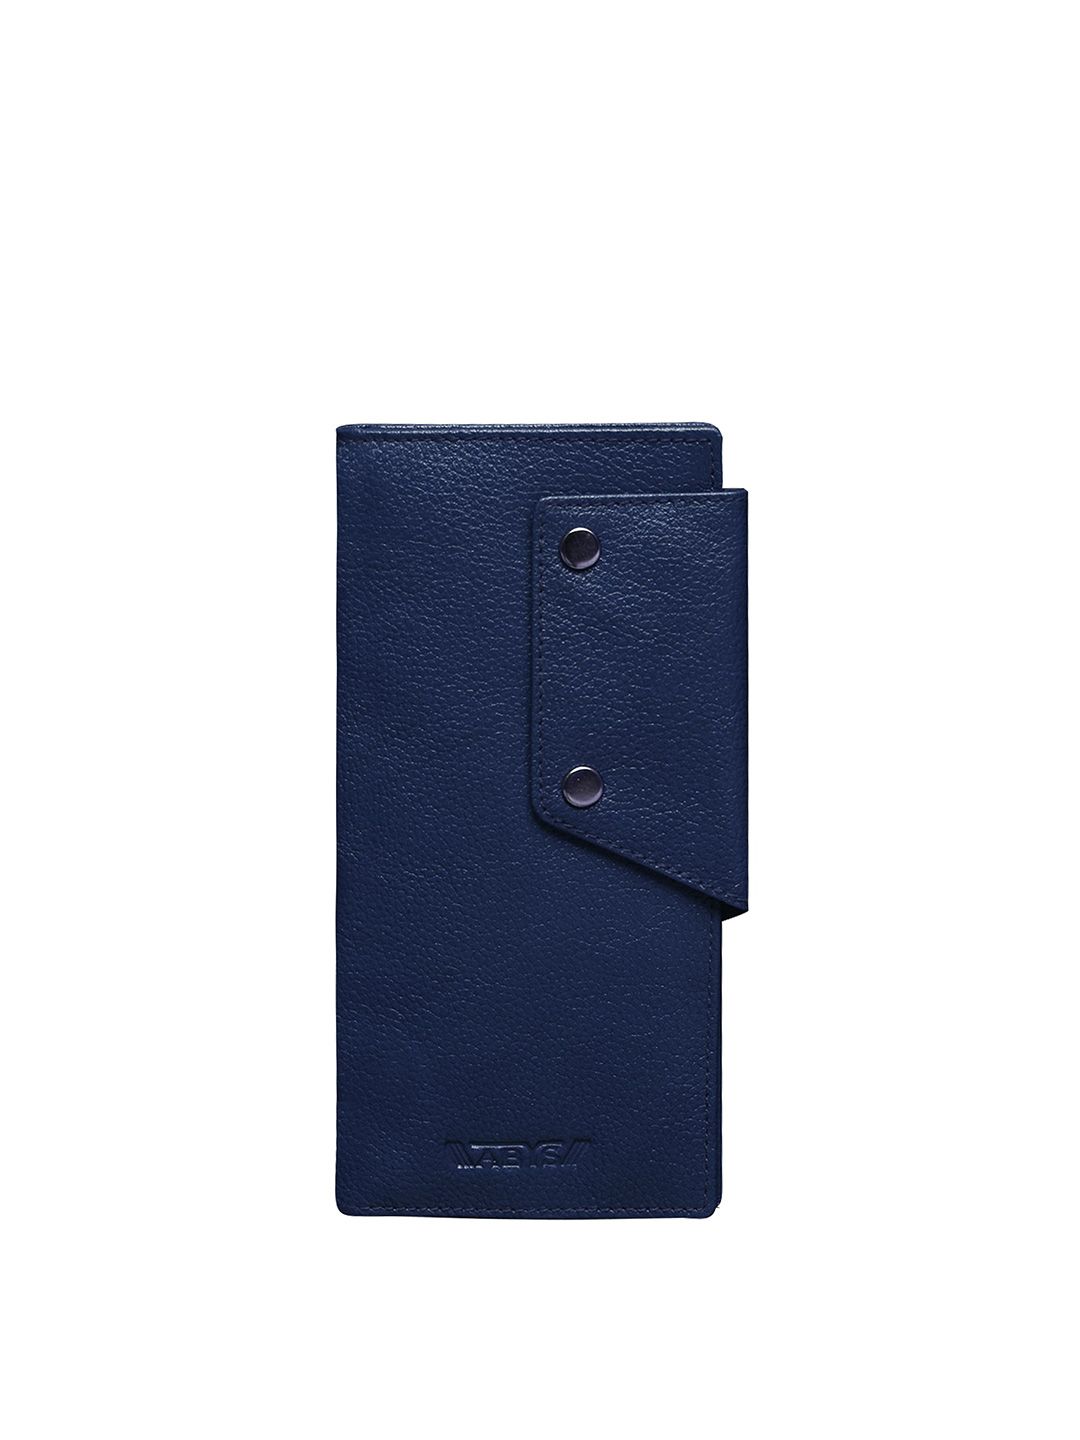 ABYS Unisex Navy Blue Textured Leather Two Fold Wallet Price in India